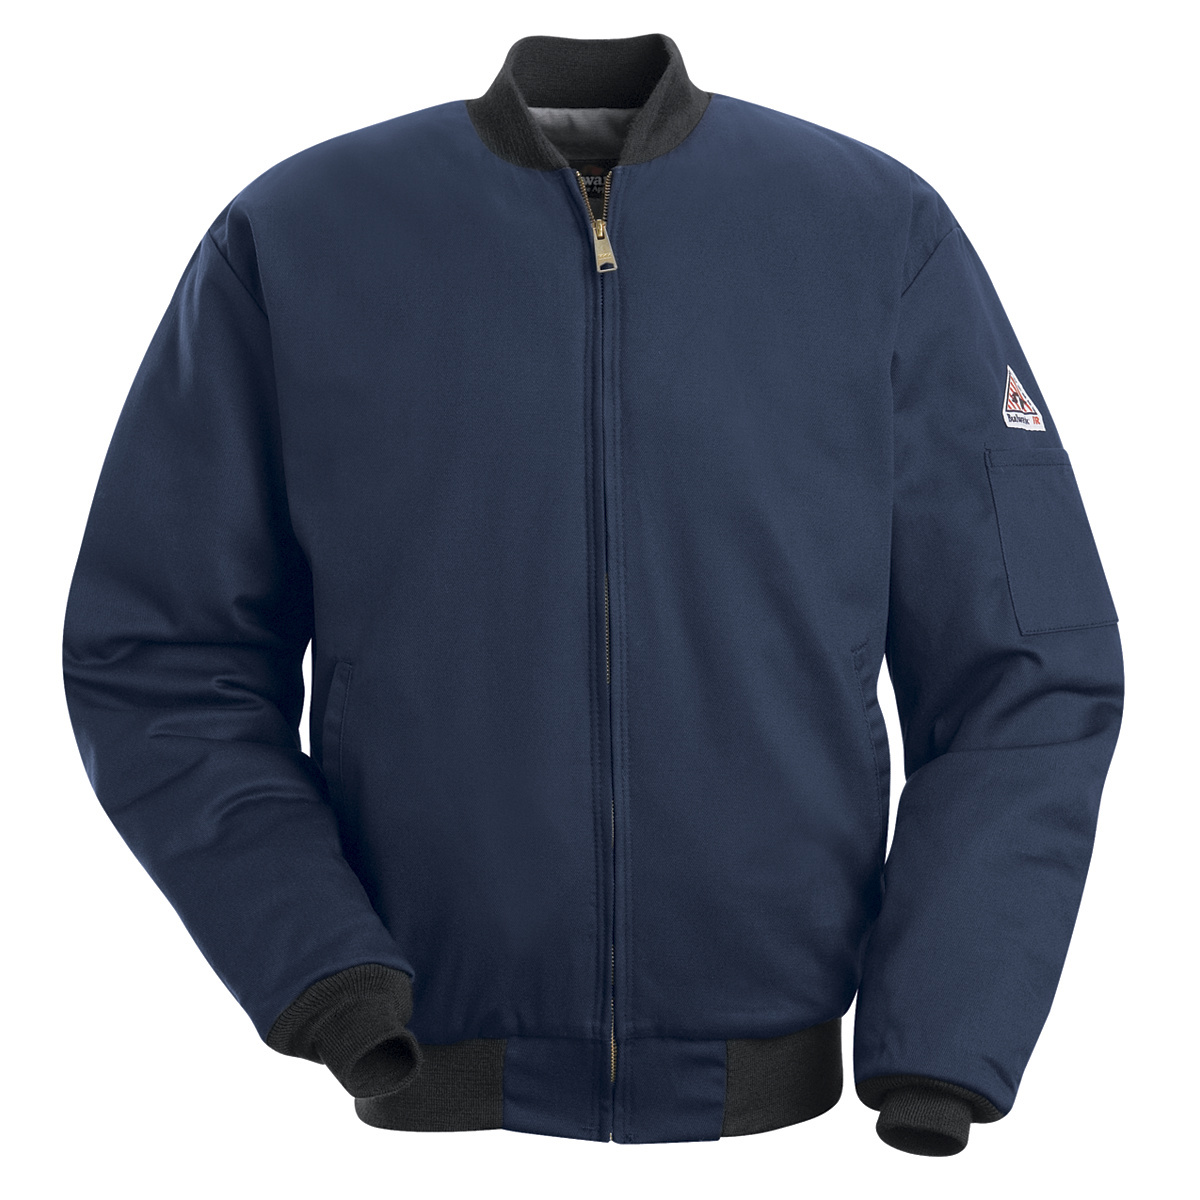 Bulwark® 2X Regular Navy Blue EXCEL FR® Twill Cotton Water Repellent Flame Resistant Jacket With Cotton Lining And Zipper Front